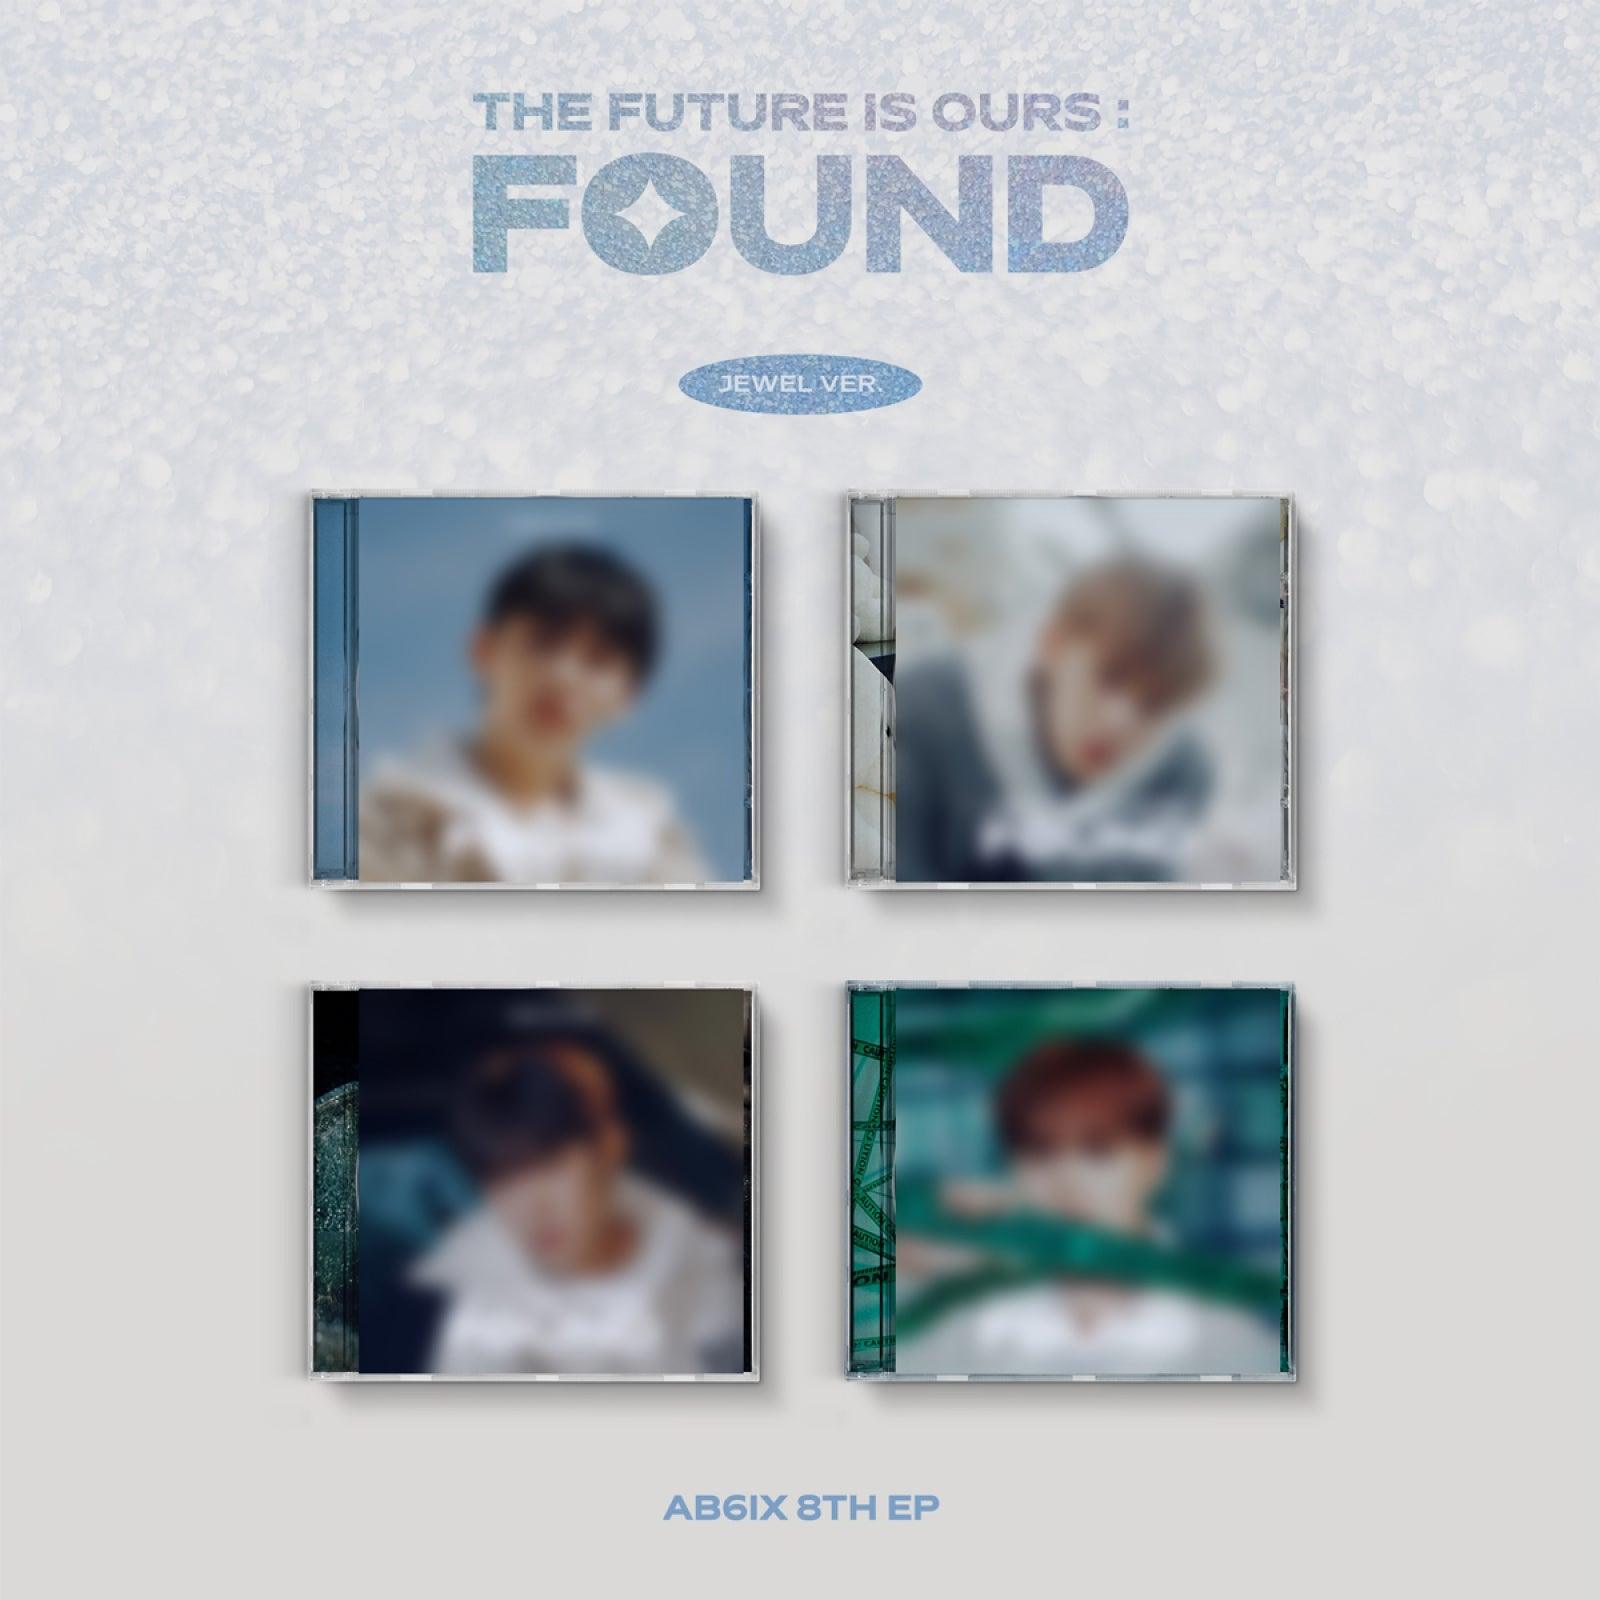 AB6IX - THE FUTURE IS OURS : FOUND / 8TH EP ALBUM (JEWEL VER.) - Shopping Around the World with Goodsnjoy